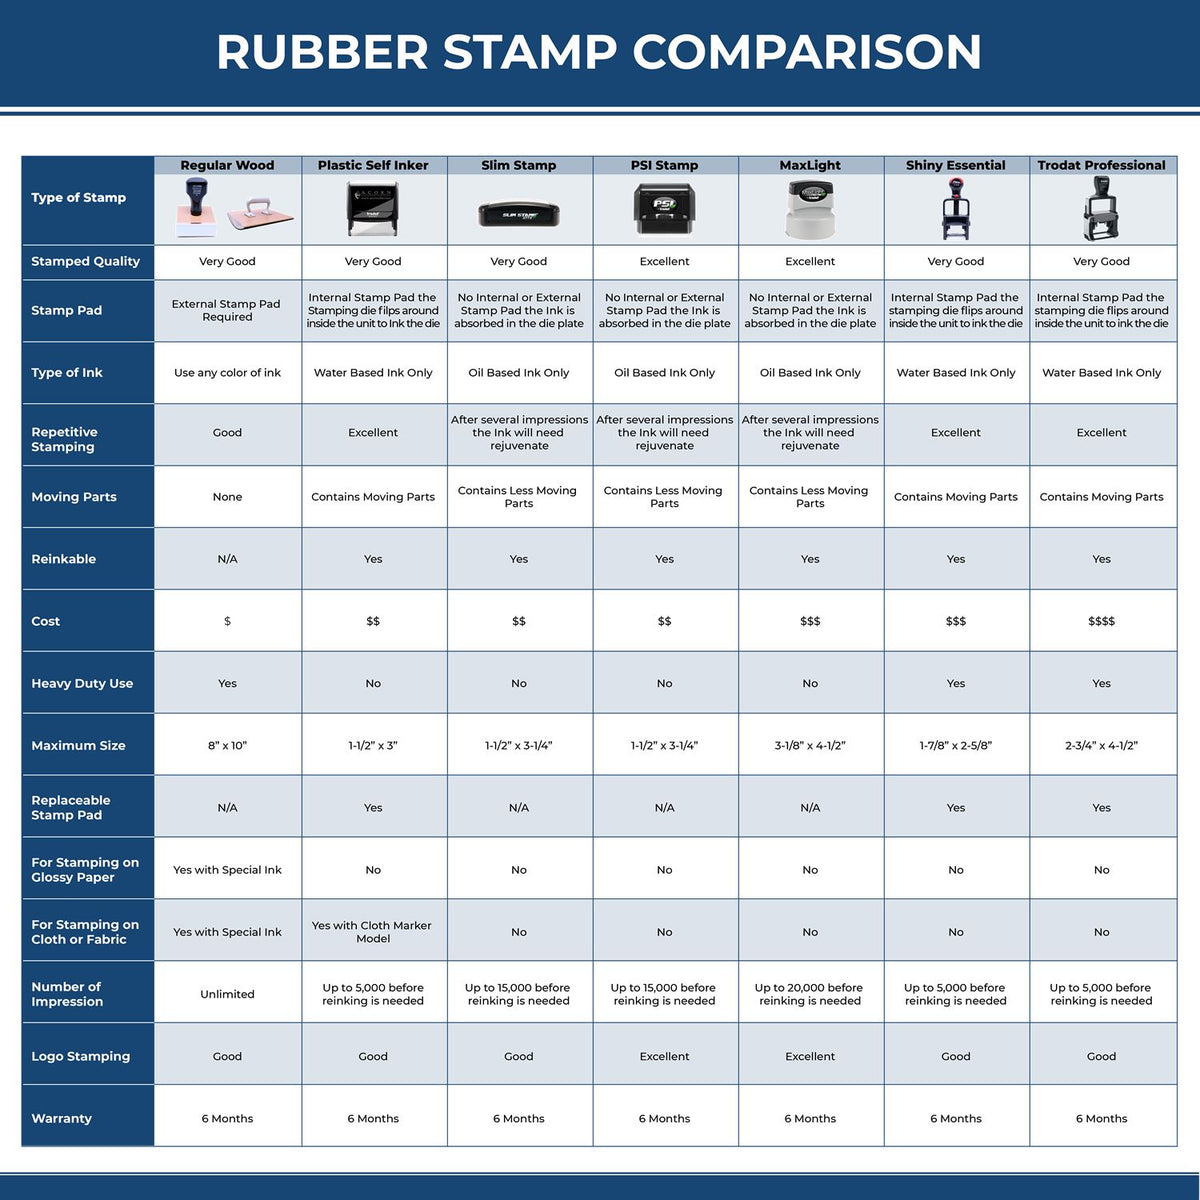 A comparison chart for the different types of mount models available for the Super Slim Massachusetts Notary Public Stamp.